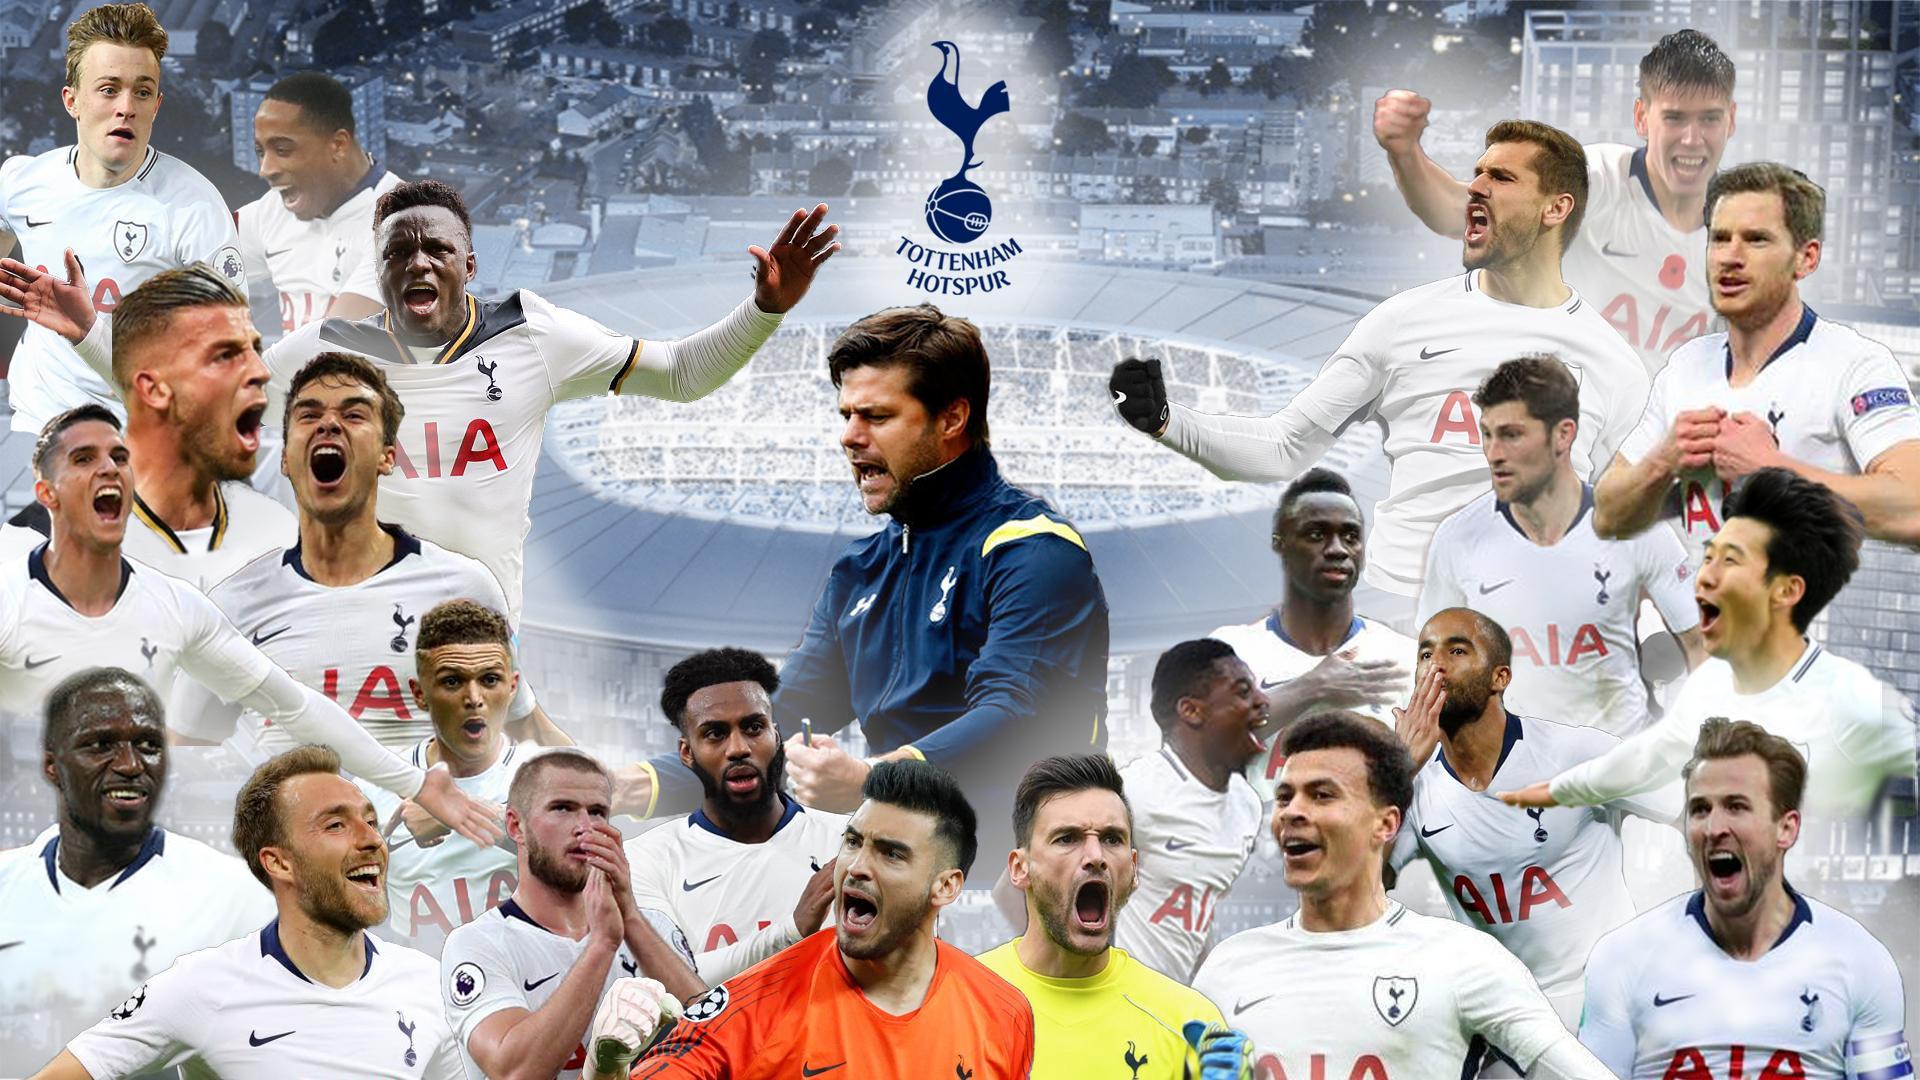 Here is another edited Tottenham wallpaper coz i dont have a life